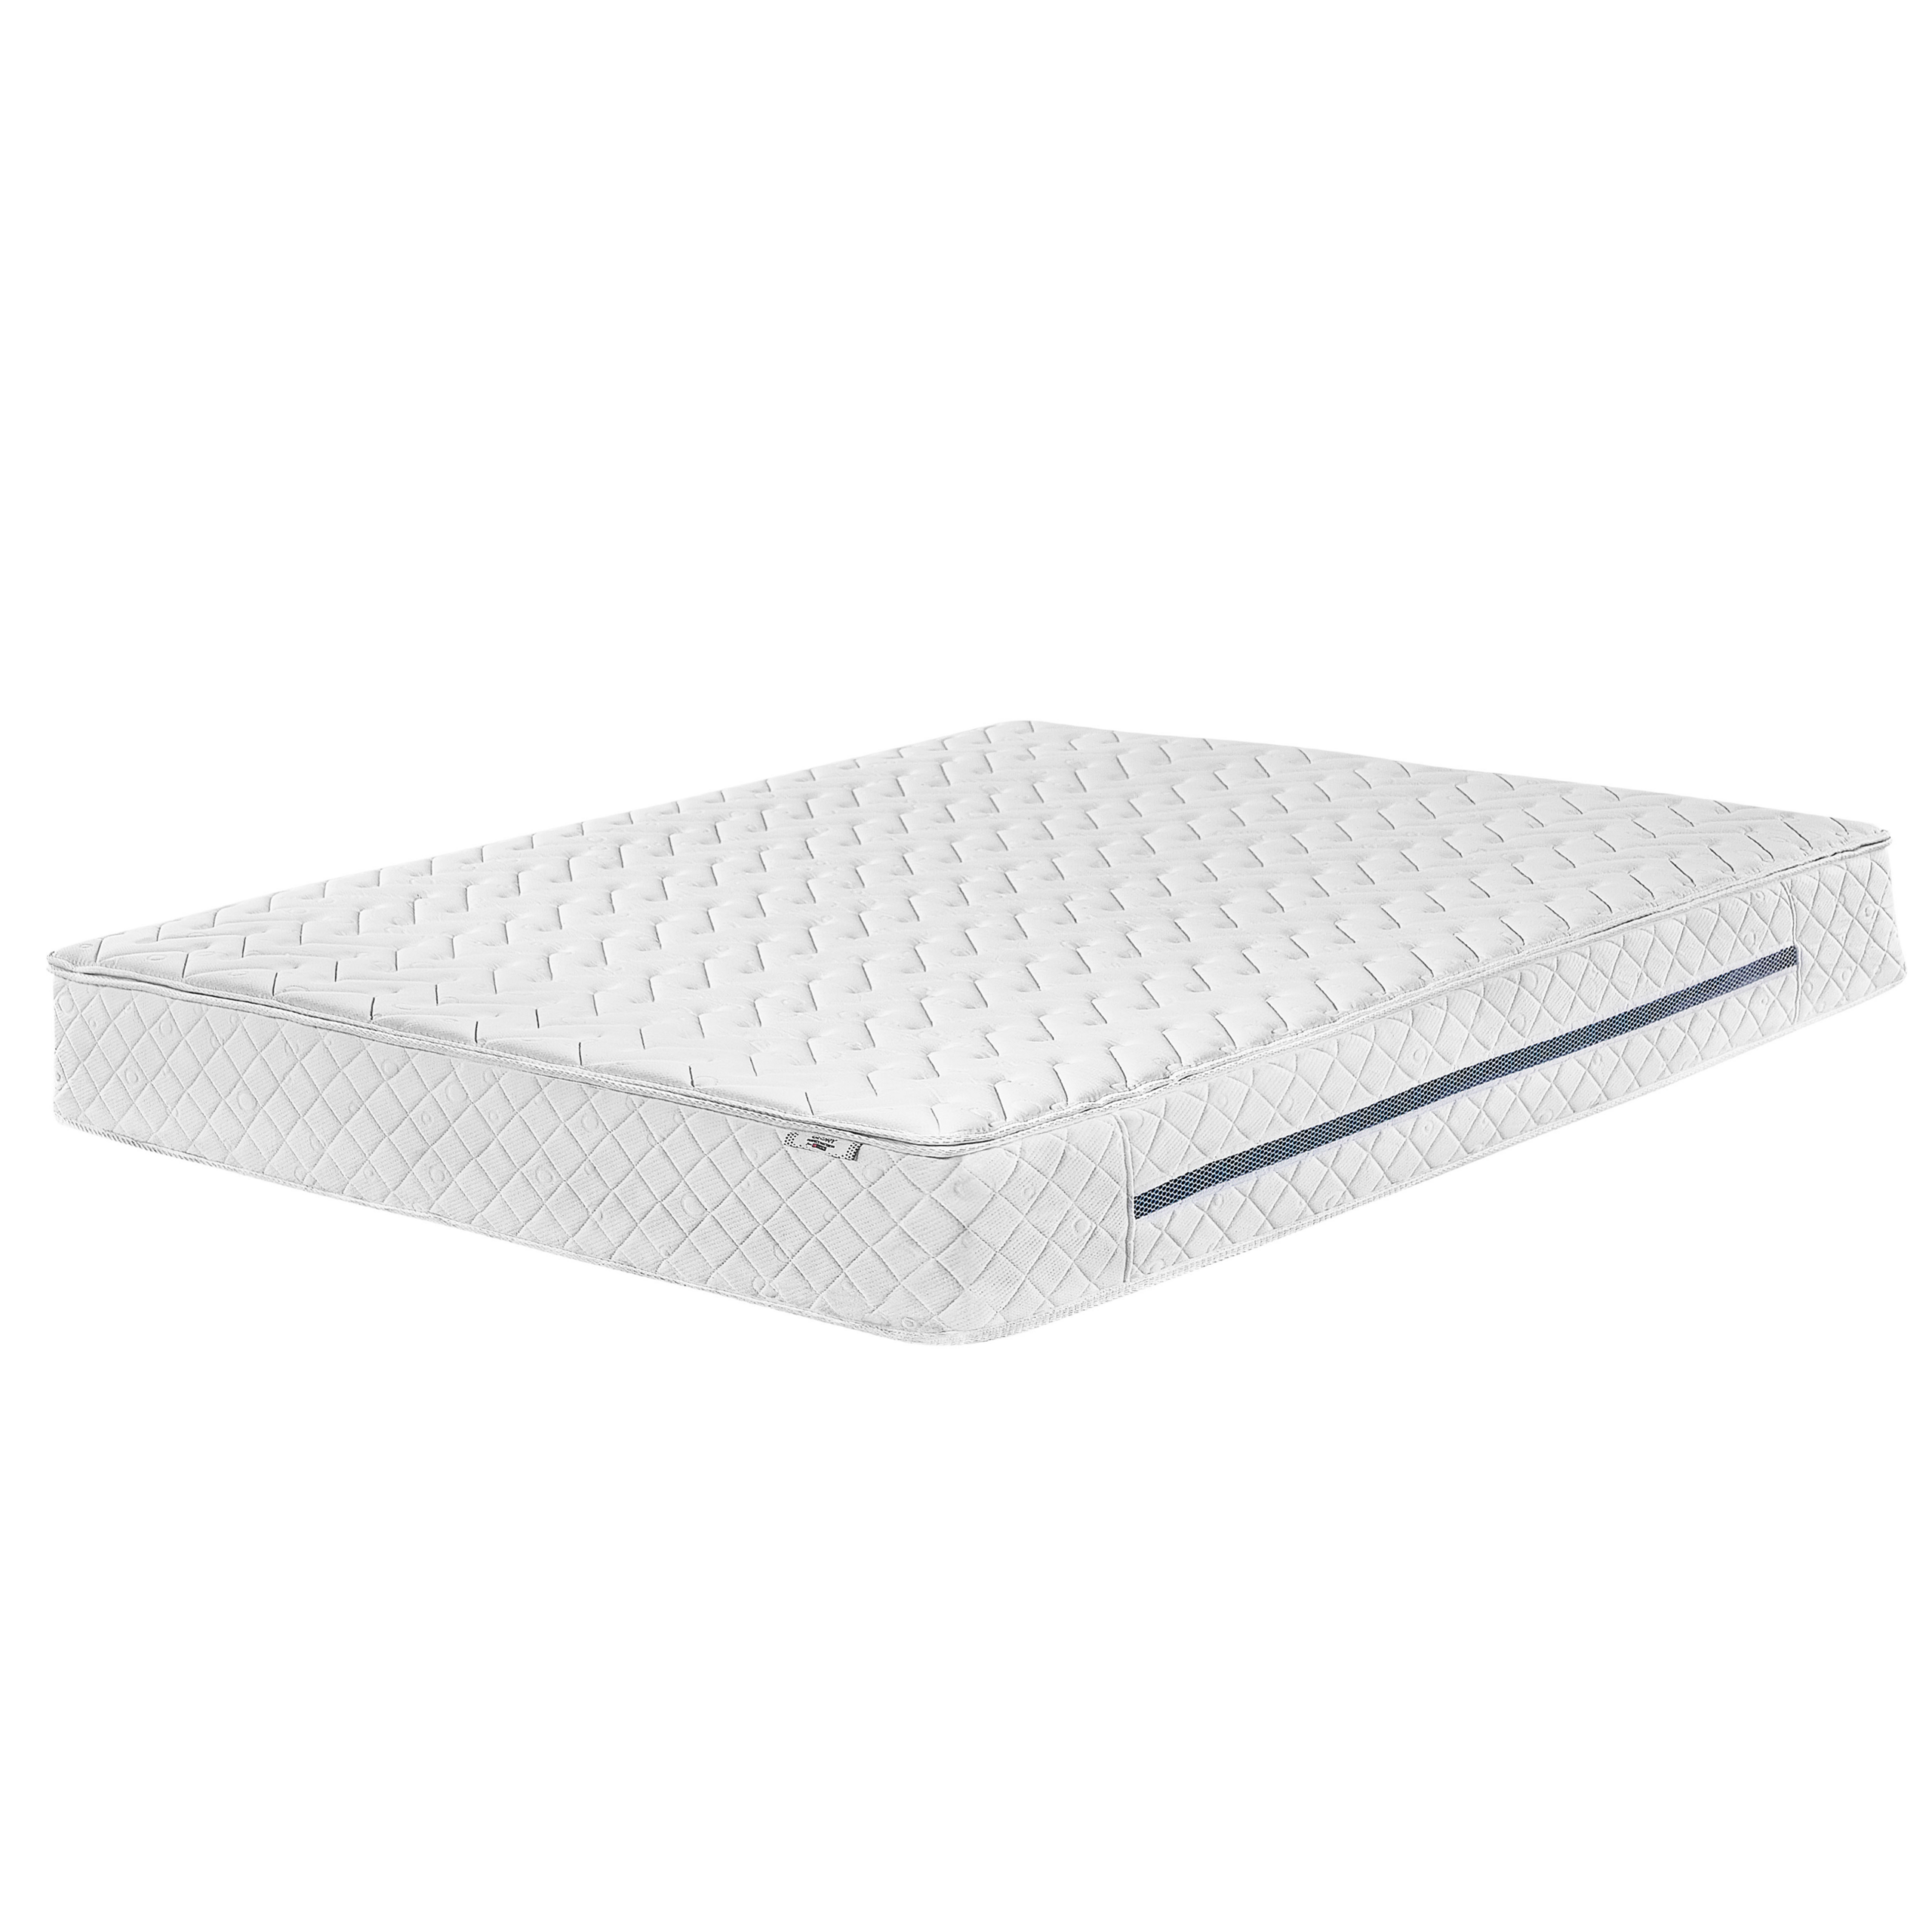 Beliani Pocket Spring Mattress Medium White 180 x 200 cm Polyester with Cooling Memory Foam with Zip